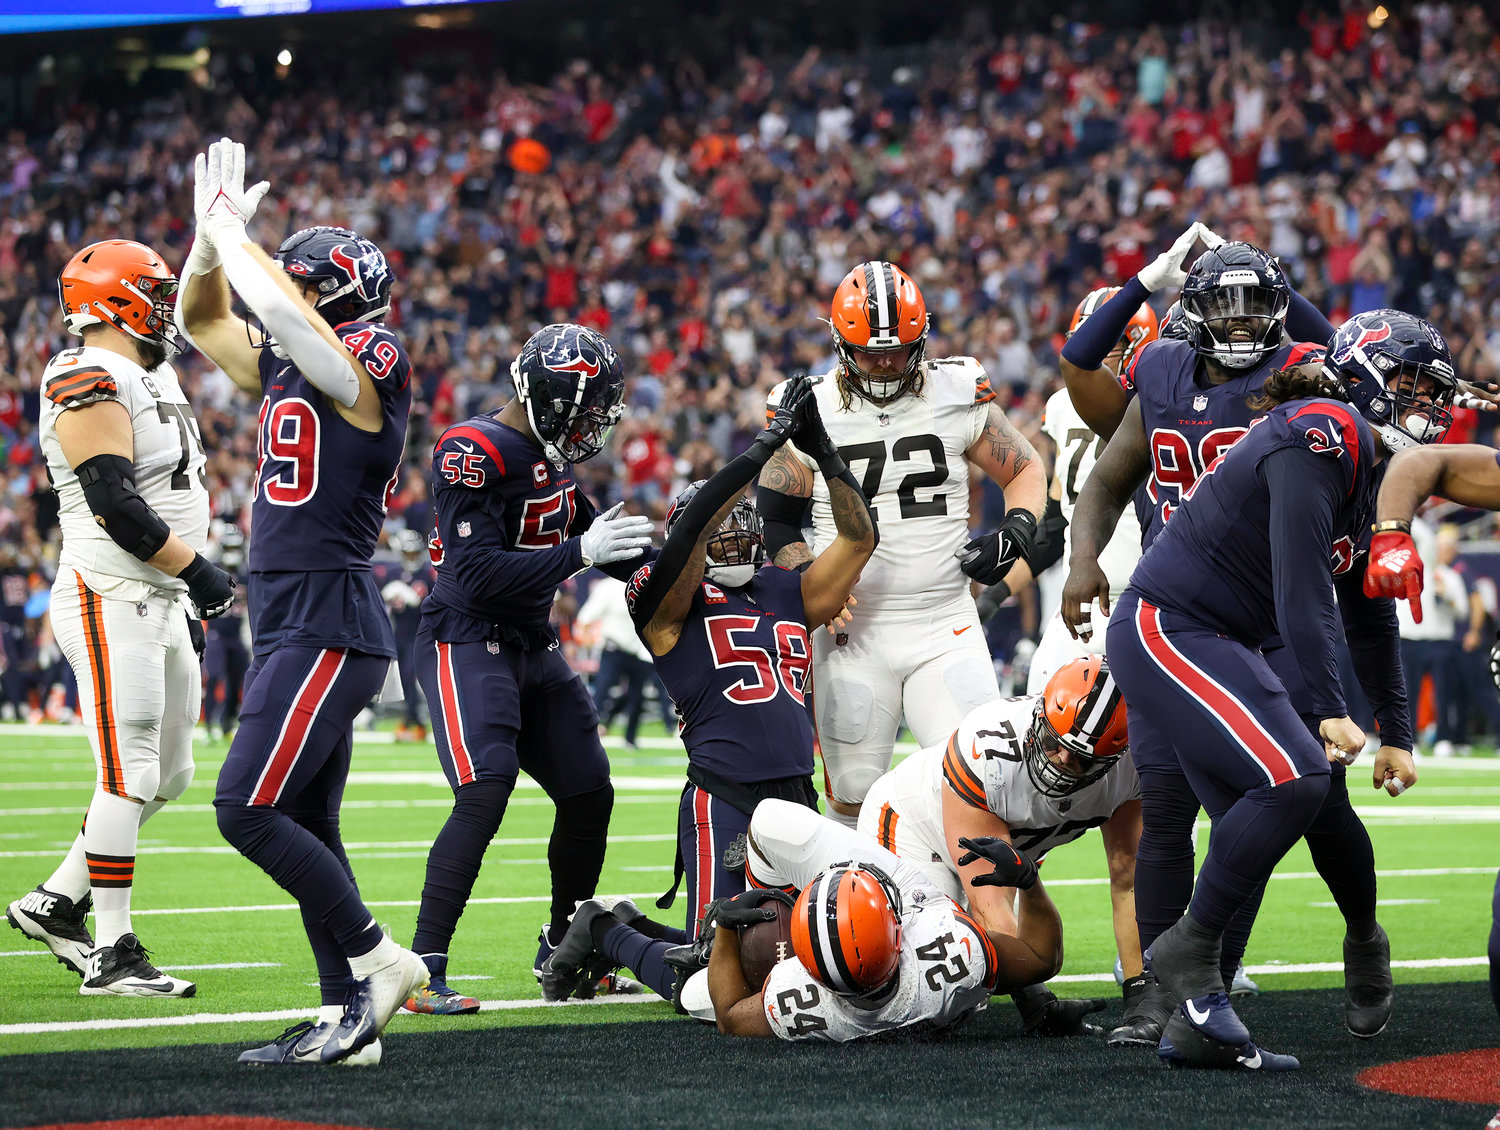 The Houston Texans defense reacts after stopping Cleveland Browns running back Nick Chubb in the end zone for a safety during an NFL game between the Houston Texans and the Cleveland Browns on Dec. 4, 2022, in Houston. The Browns won, 27-14.